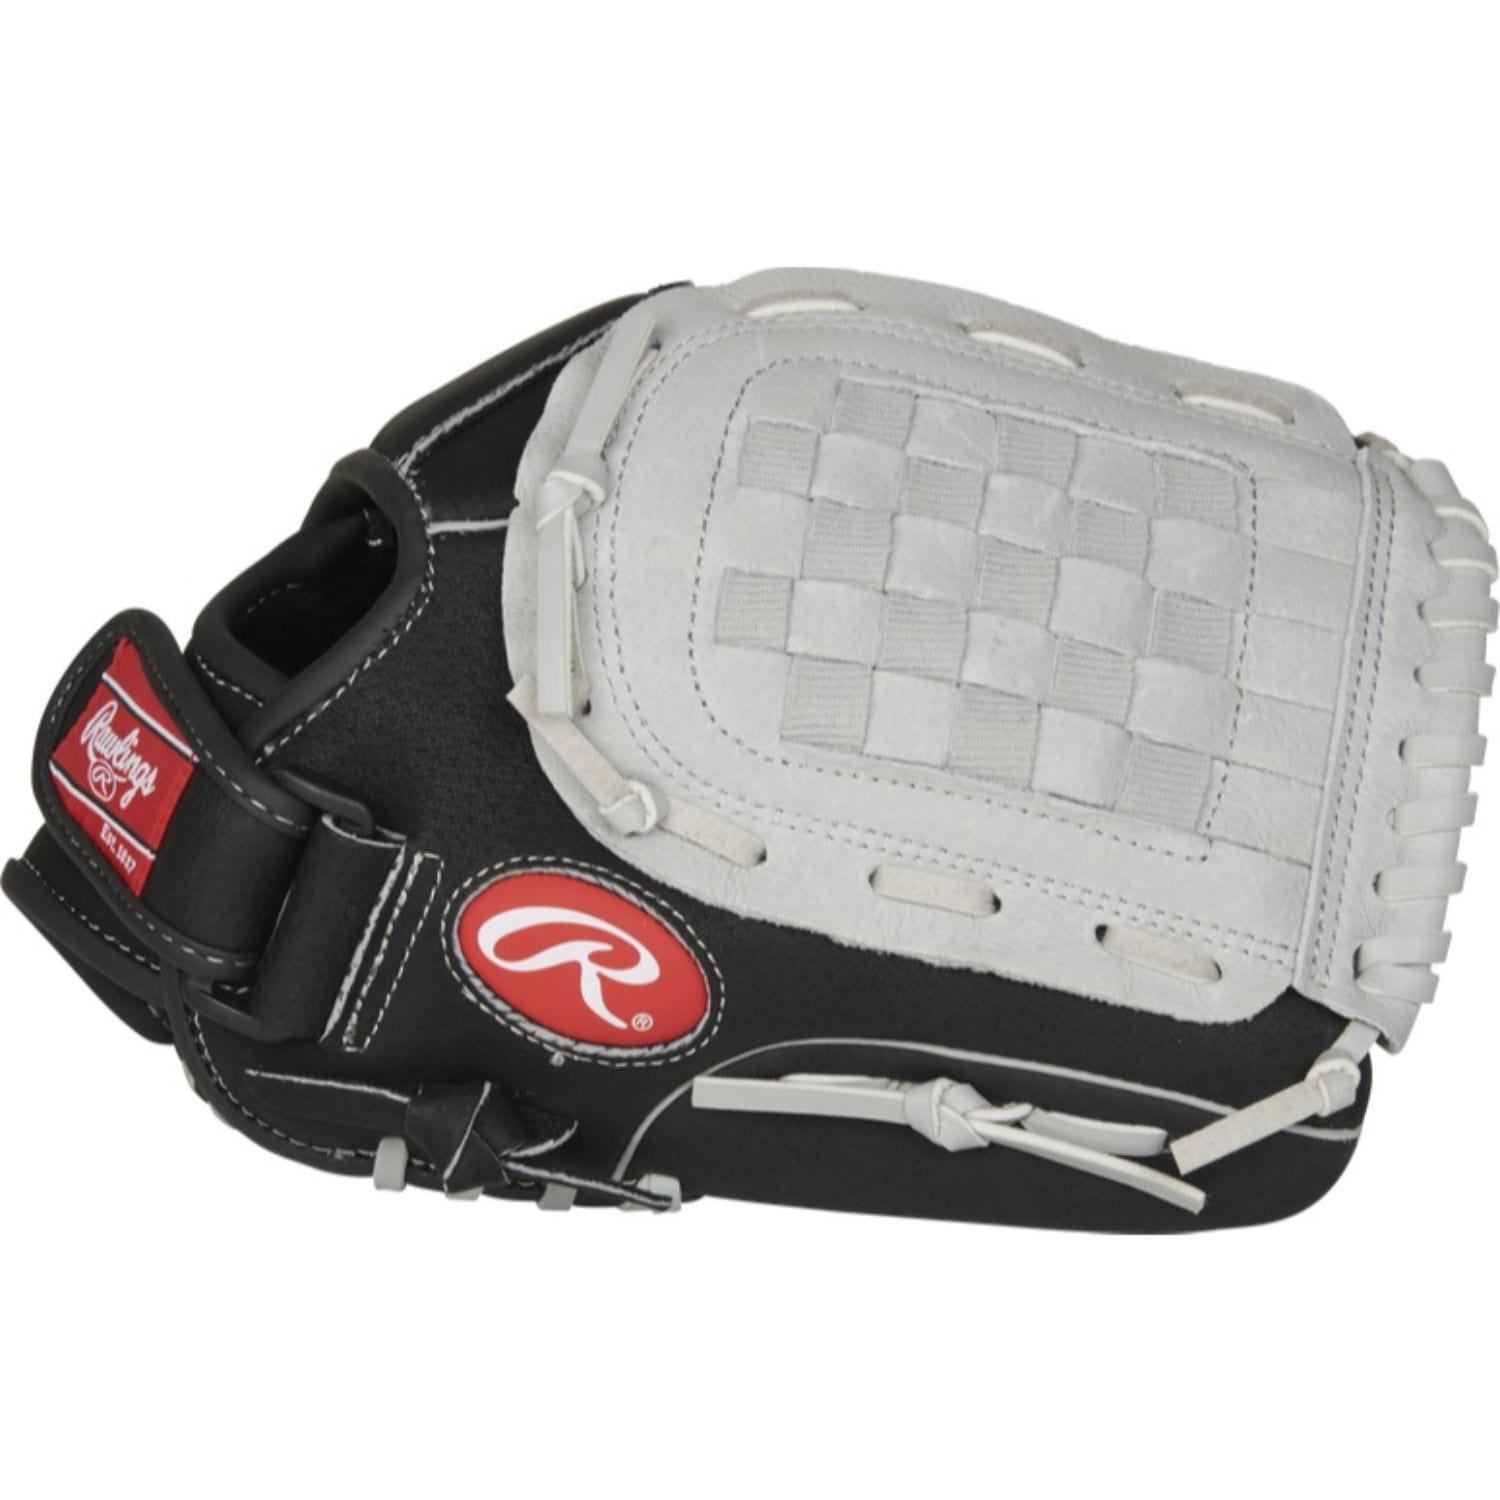 Rawlings Sports : Baseball Rawlings 11.5 In Sure Catch Youth Infield Outfield Glove RH